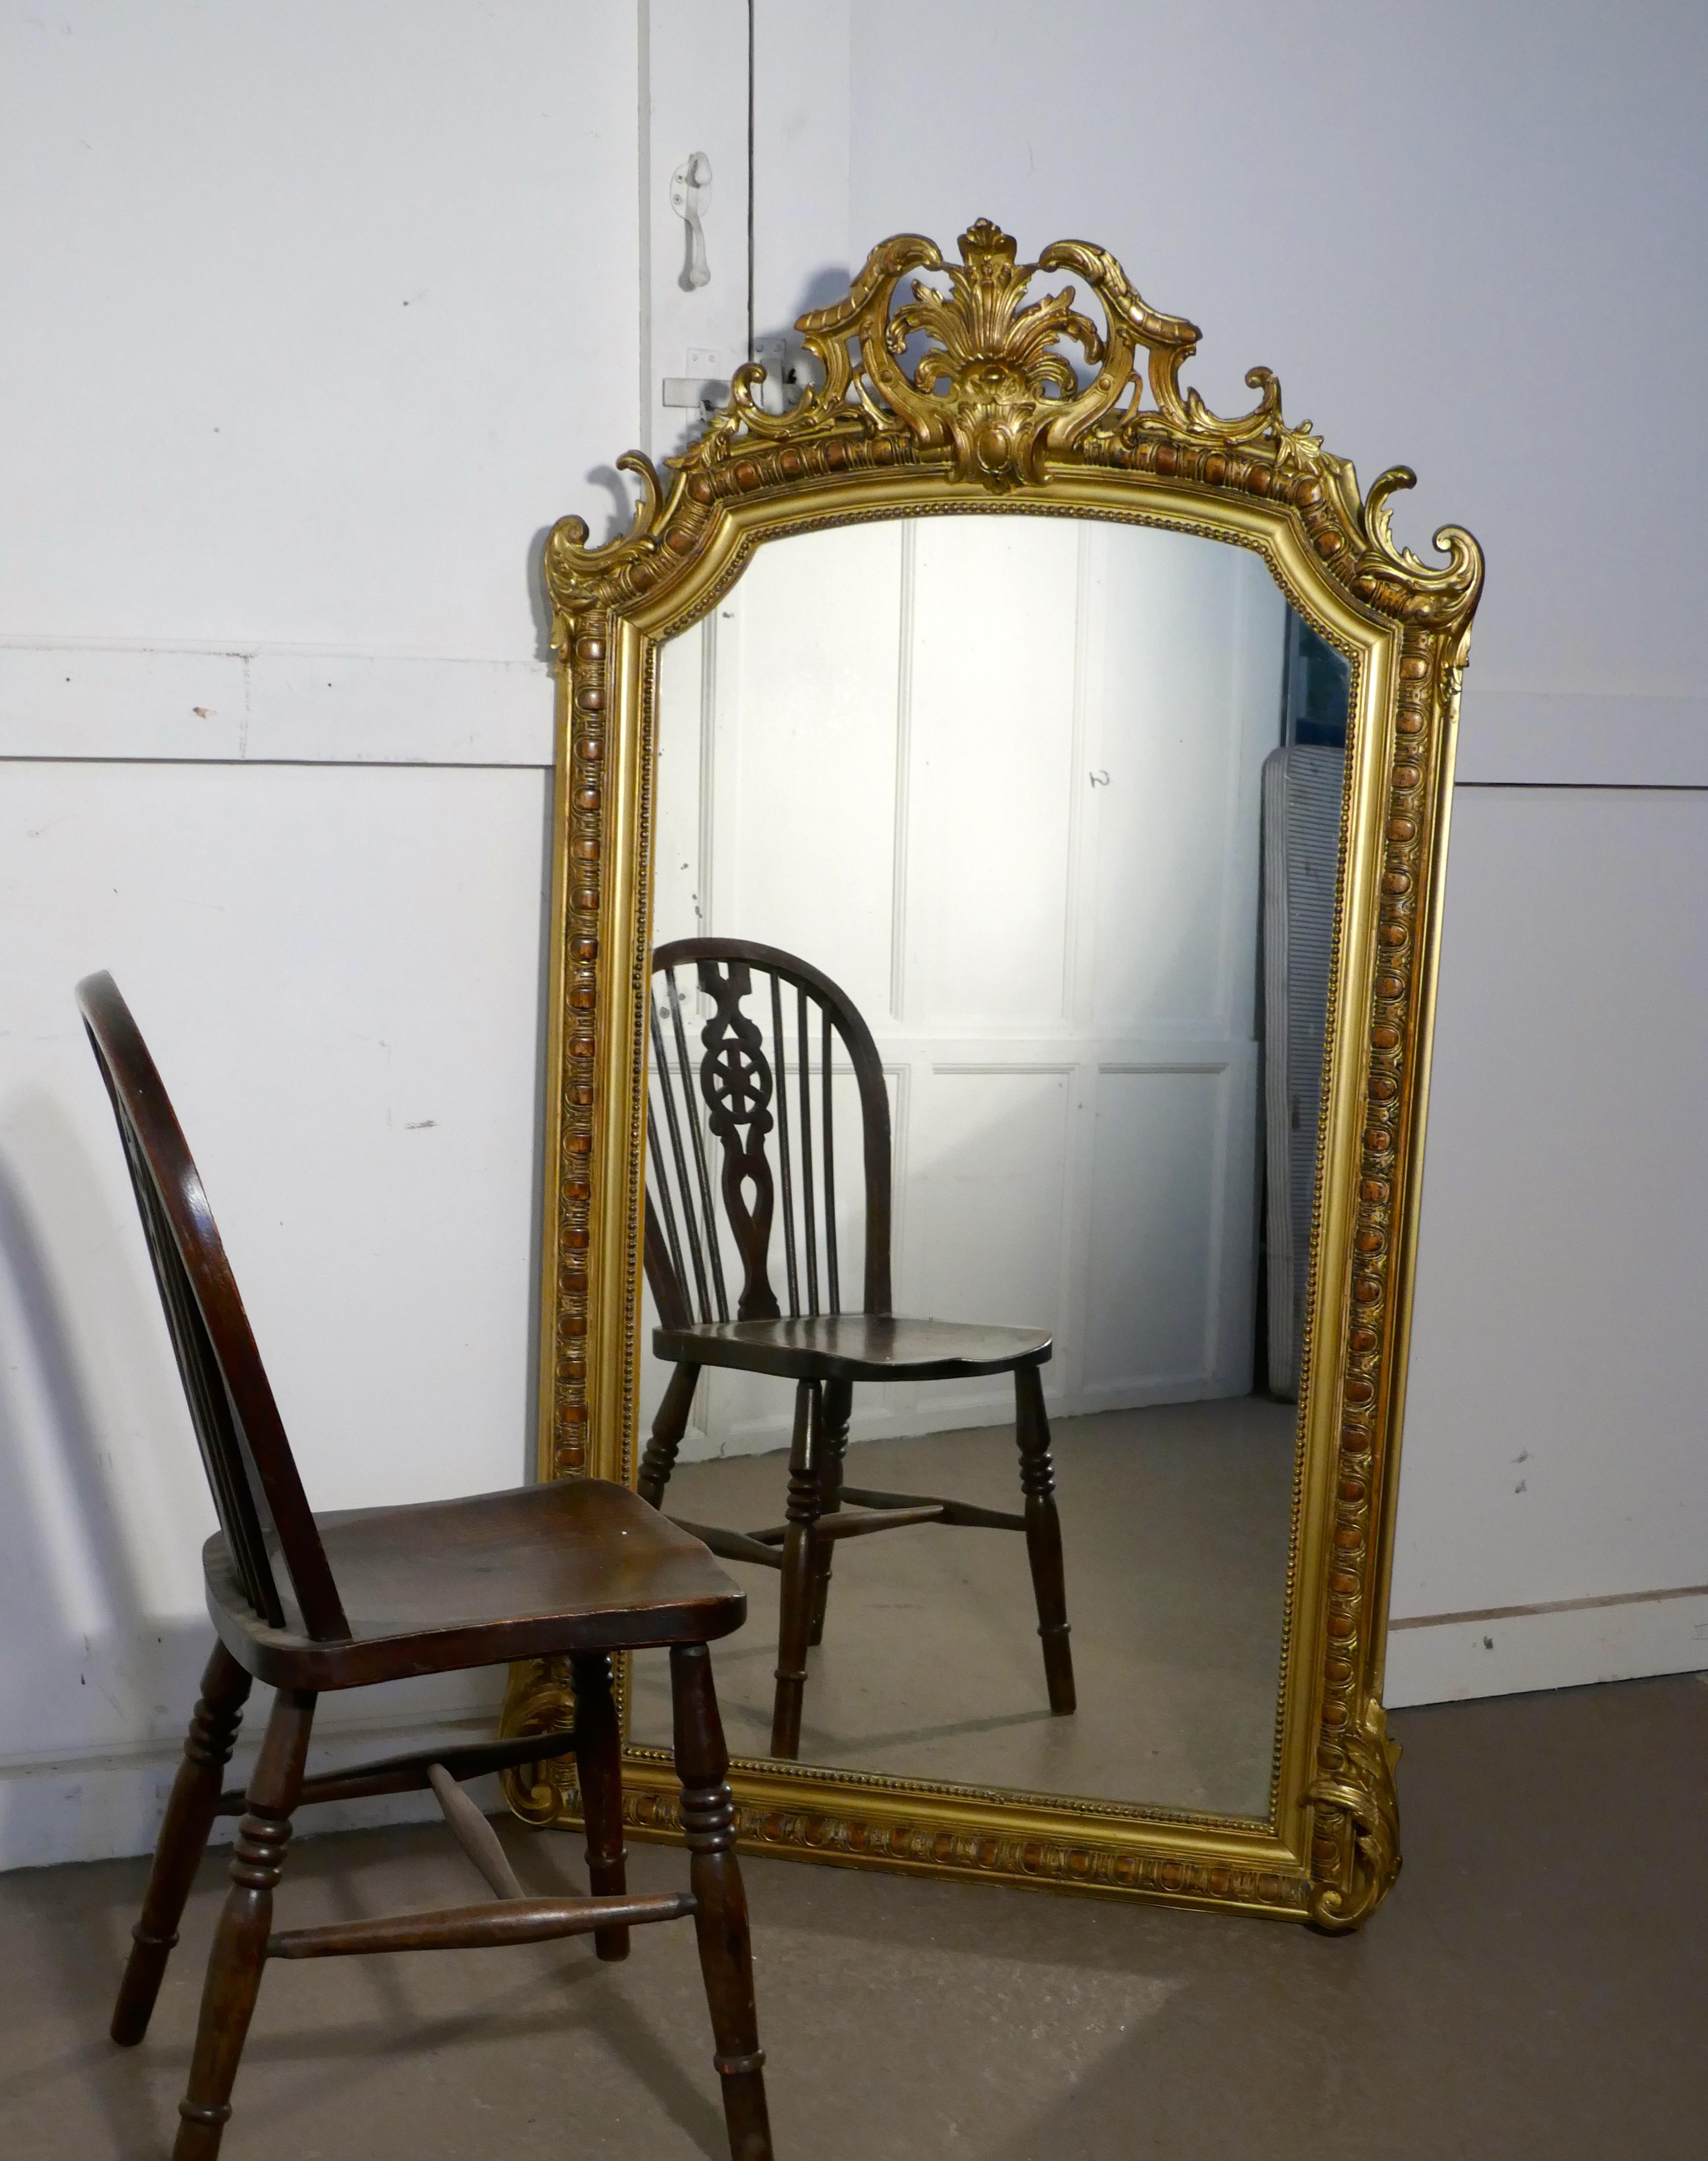 A large 19th century French gilt wall mirror

This mirror has a beautiful gilt and Gesso frame the carved frame is painted in a rich bright gold which has darkened slightly with age
The wide moulded frame is decorated and has an elegant